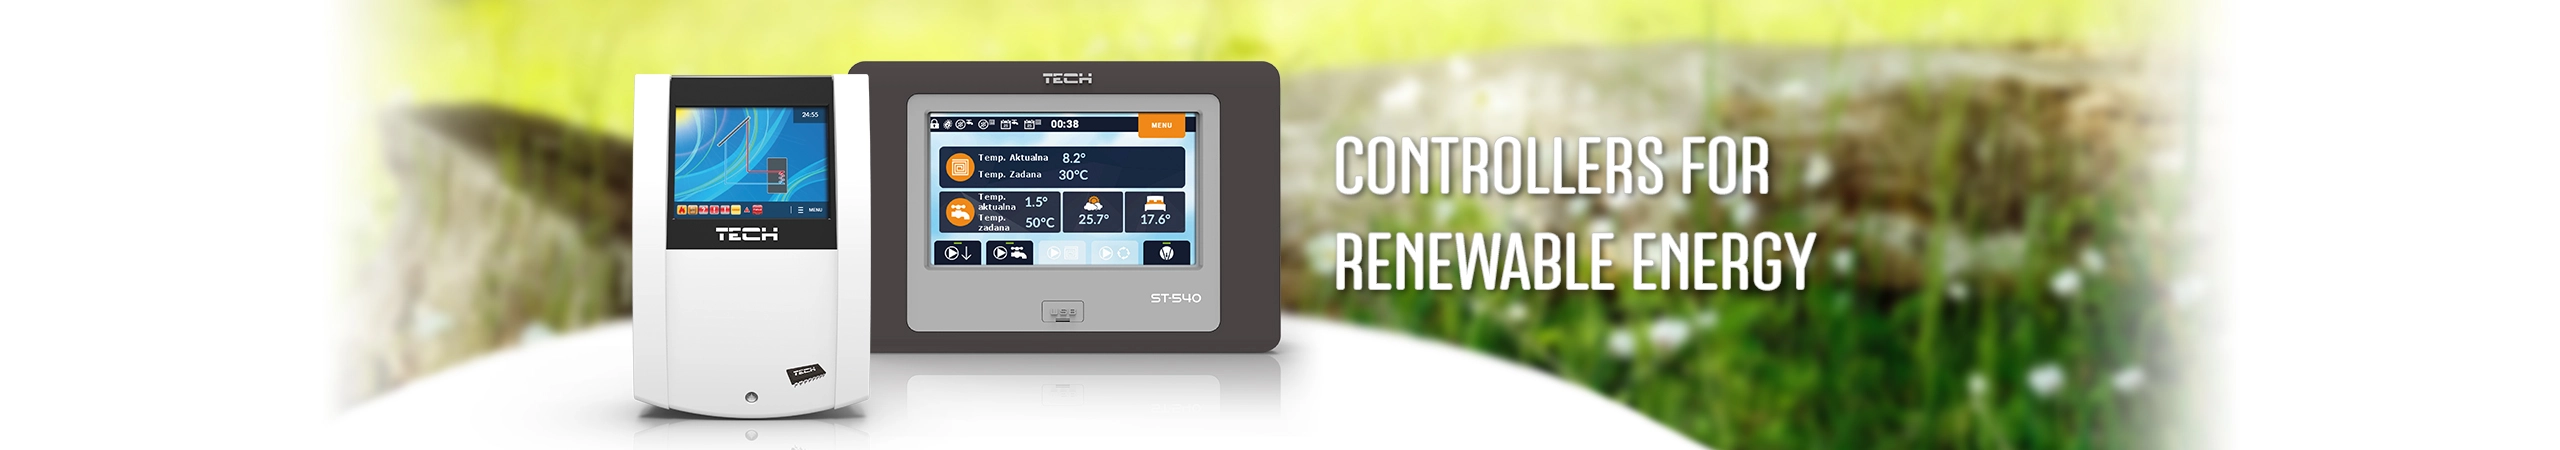 Controllers for renewable energy - TECH Controllers